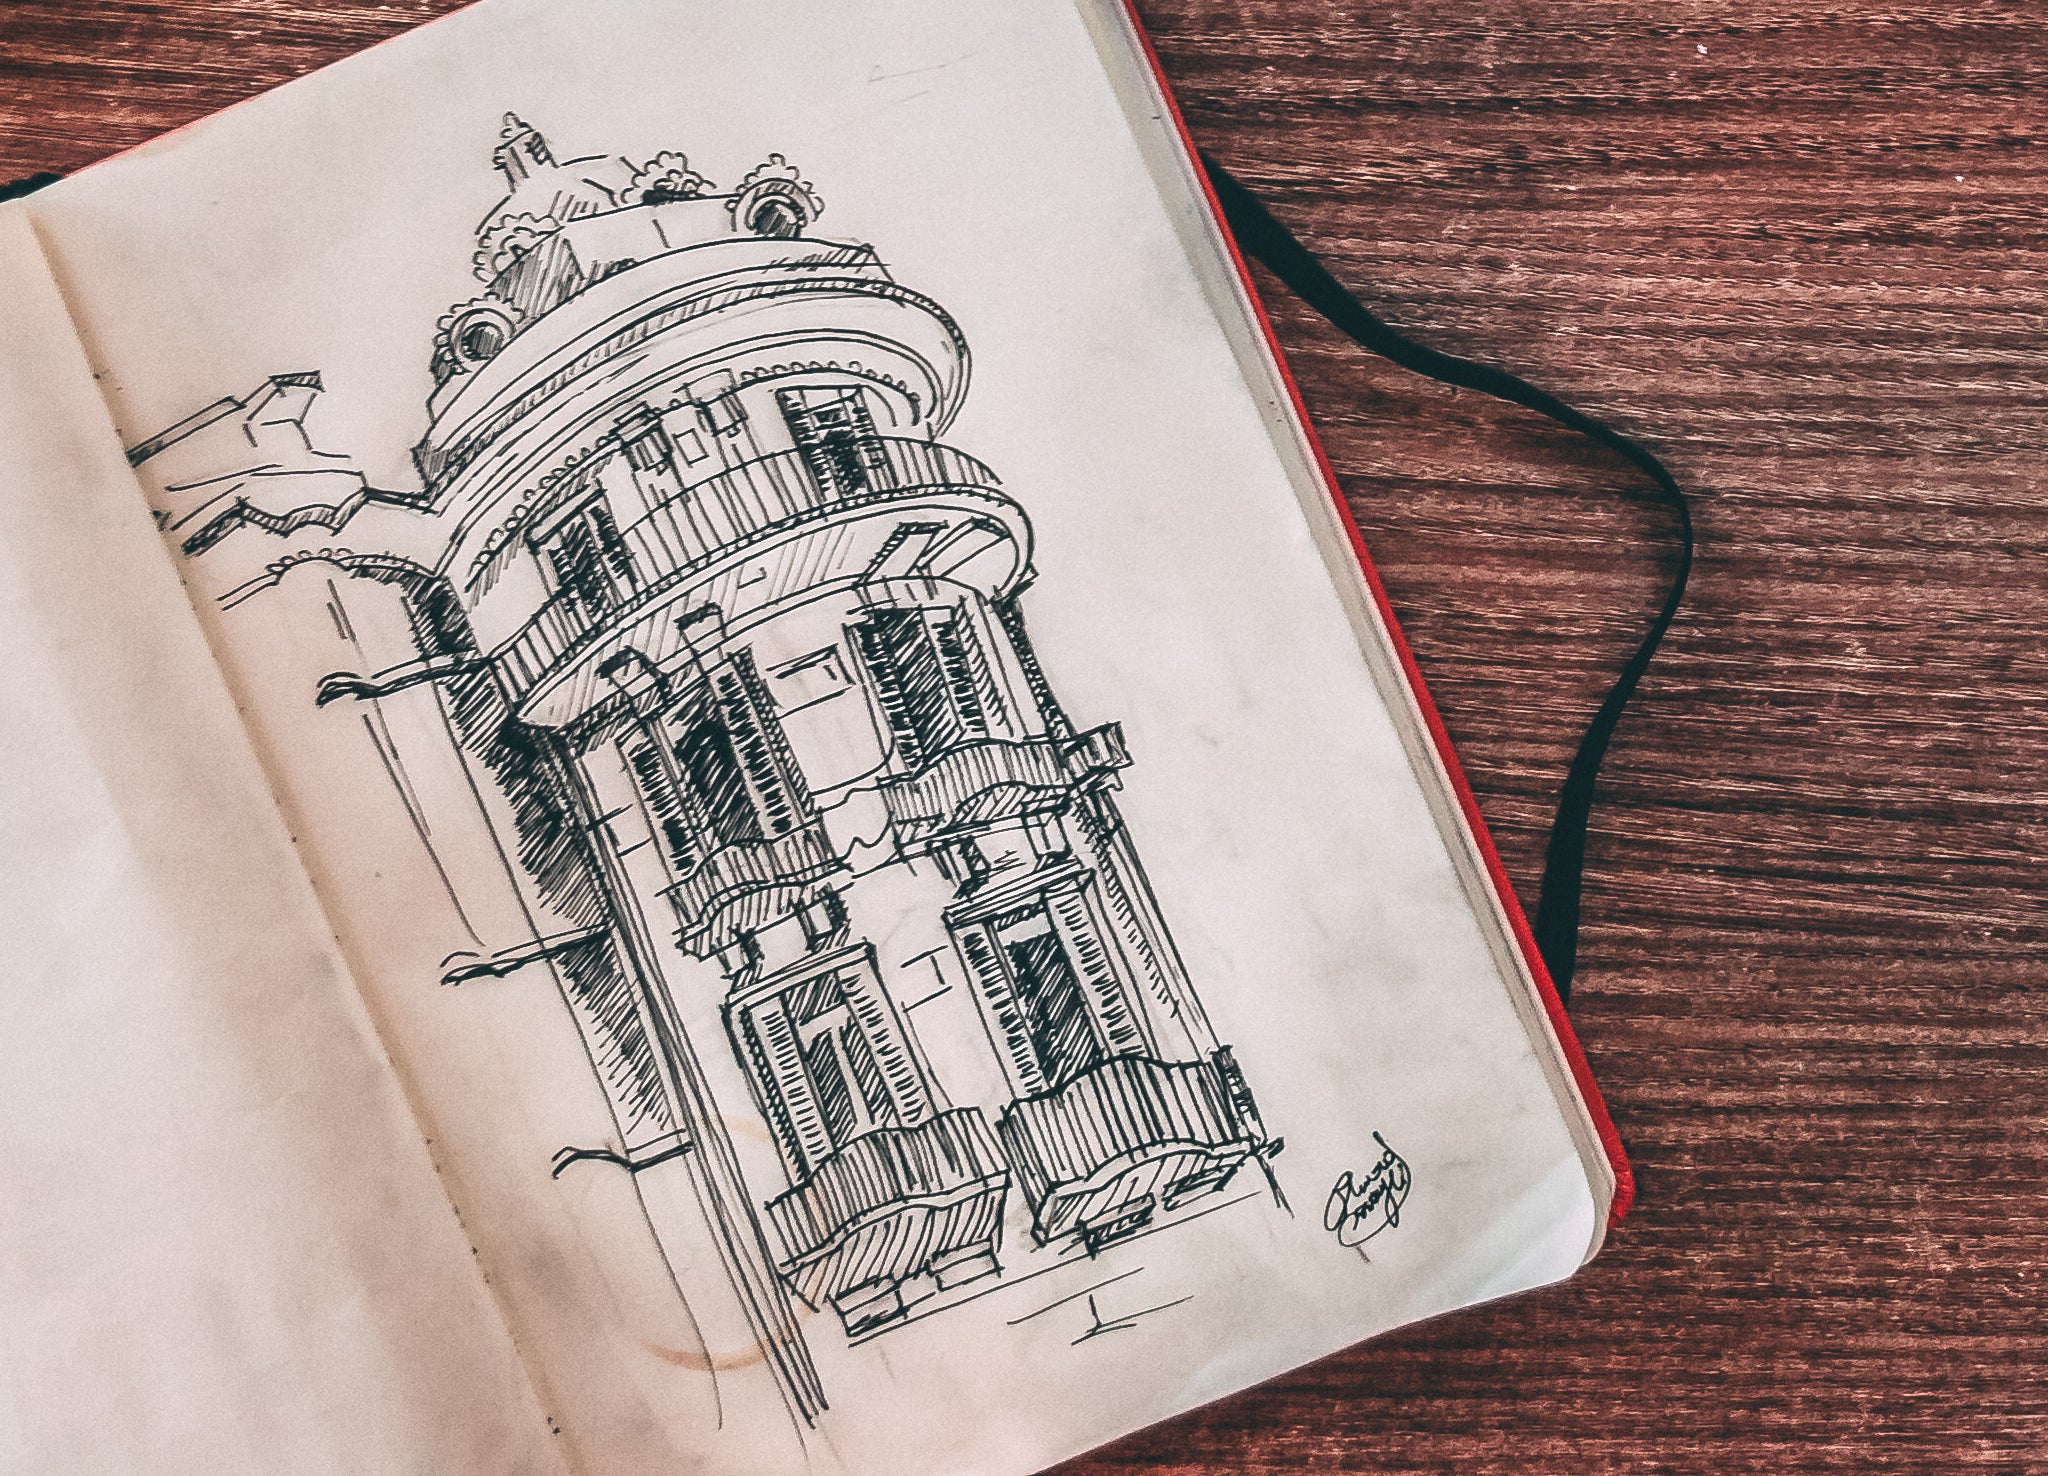 Architectural style drawing created in a notebook.